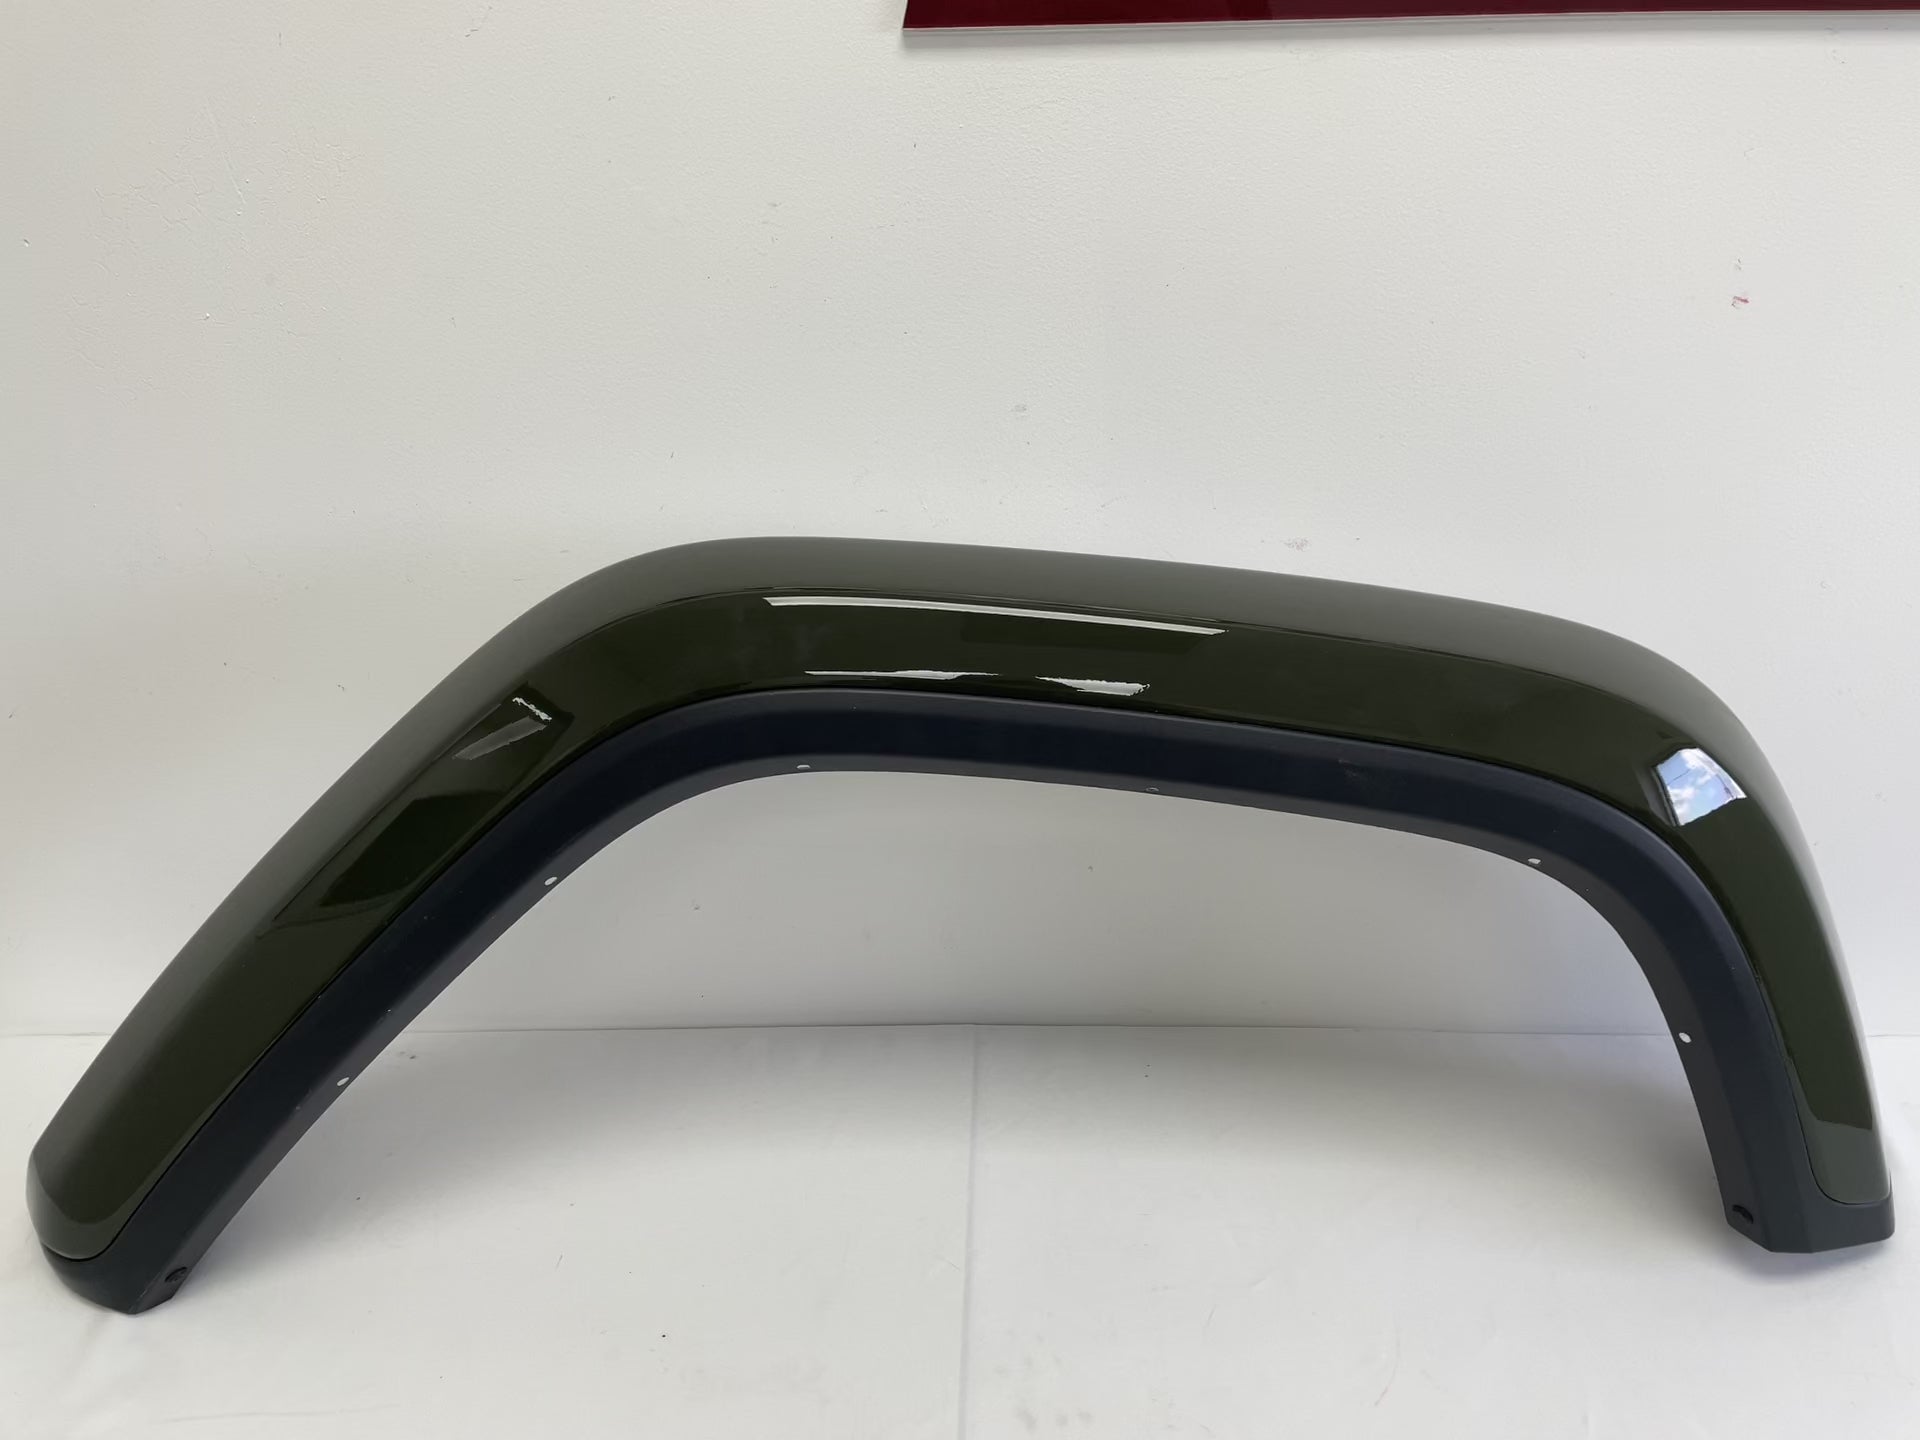 24923 - 2018-2023 Jeep Wrangler Rear Fender Flare Painted Sarge Green (PGG)